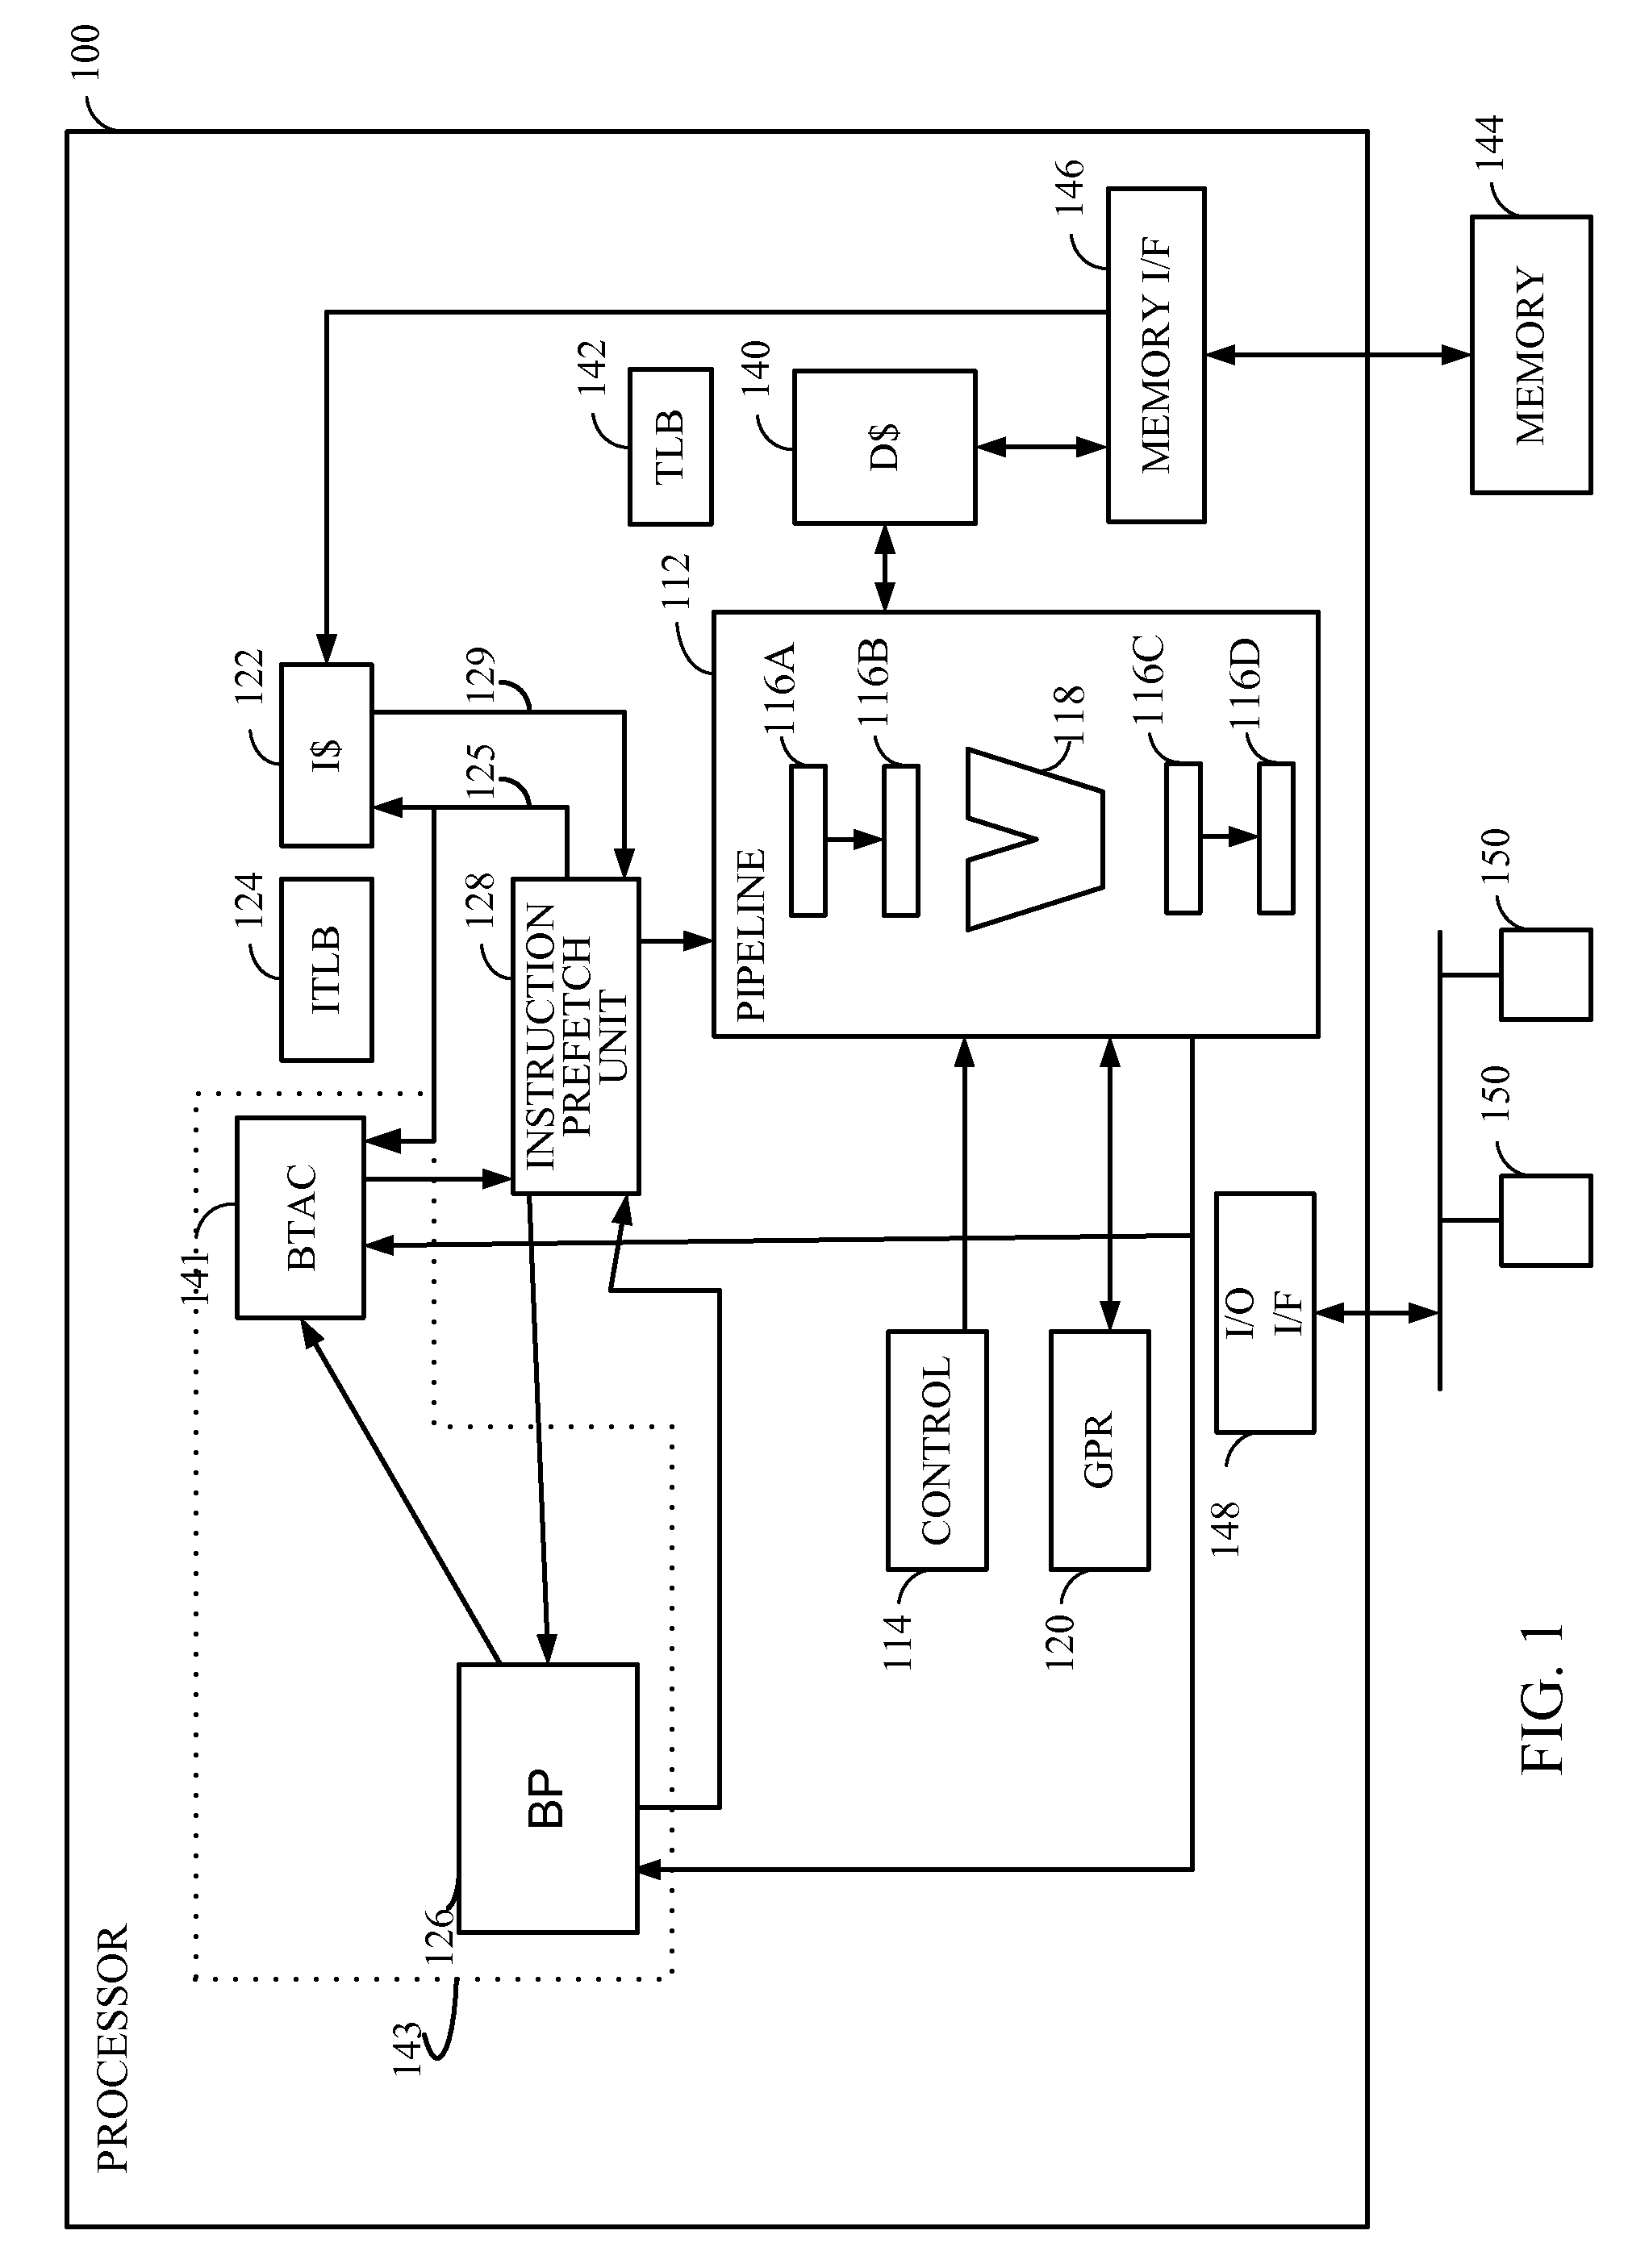 Methods and apparatus for proactive branch target address cache management